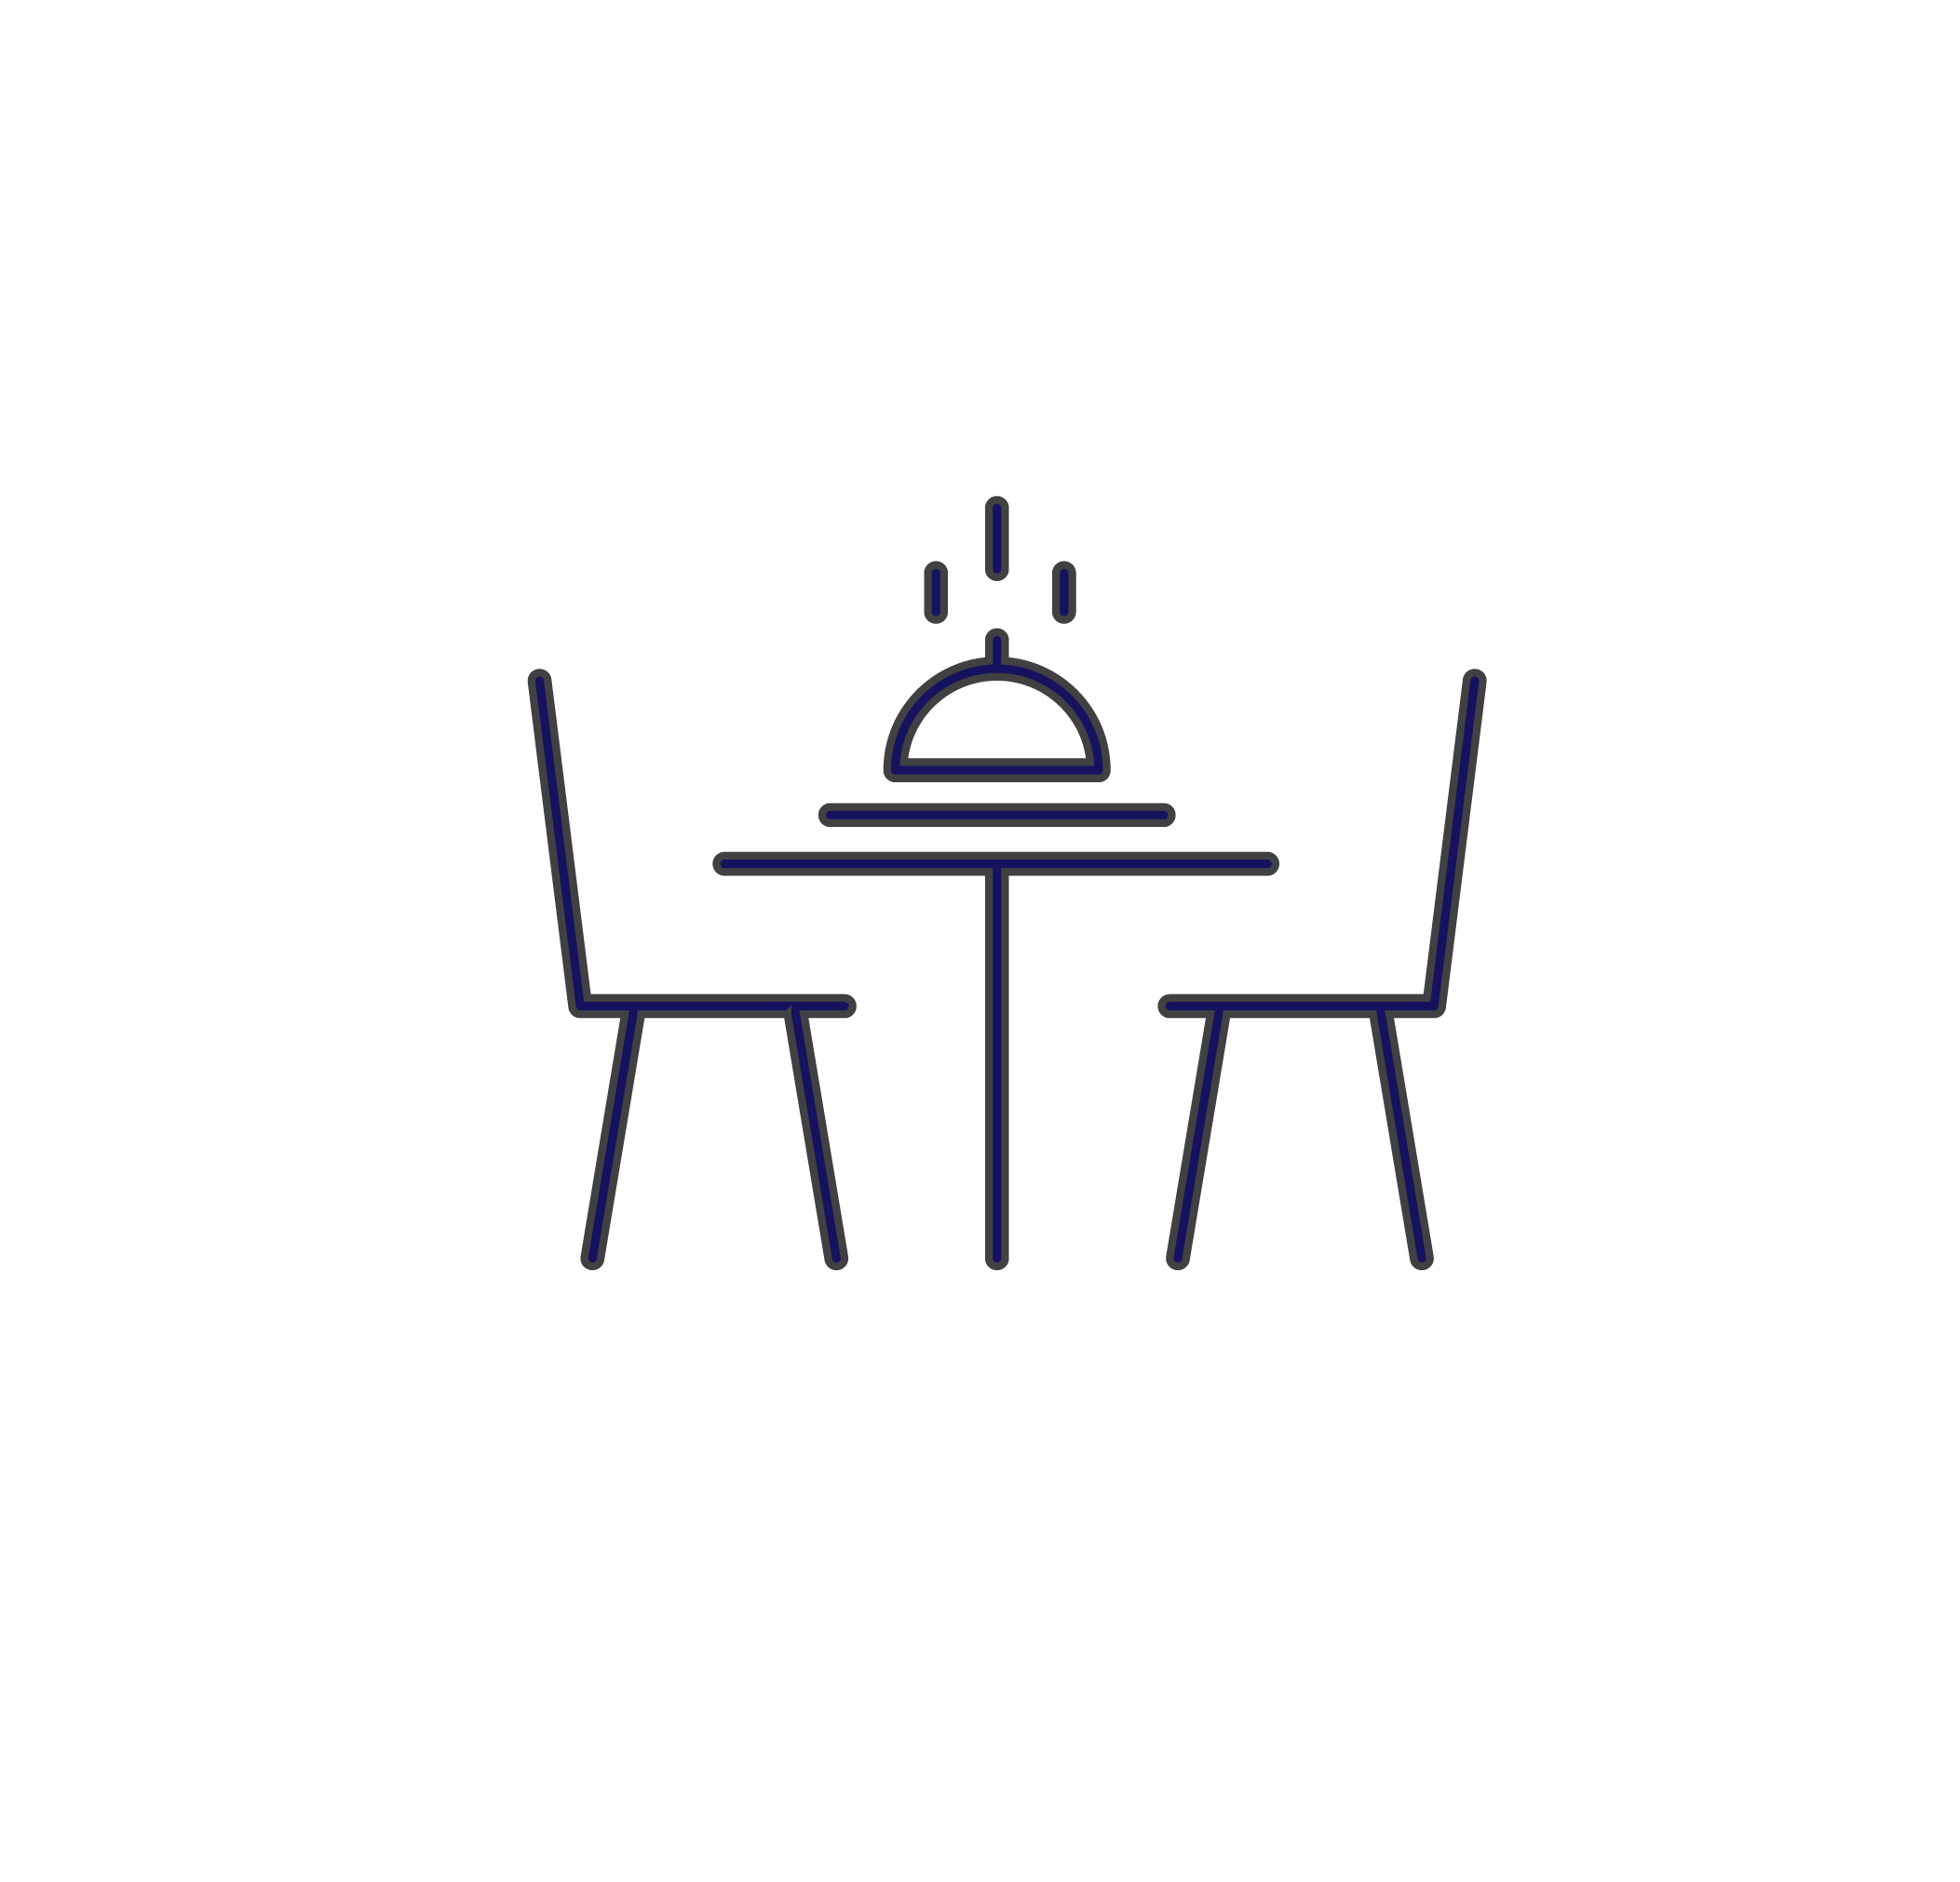 Table with two chairs and meal on it icon